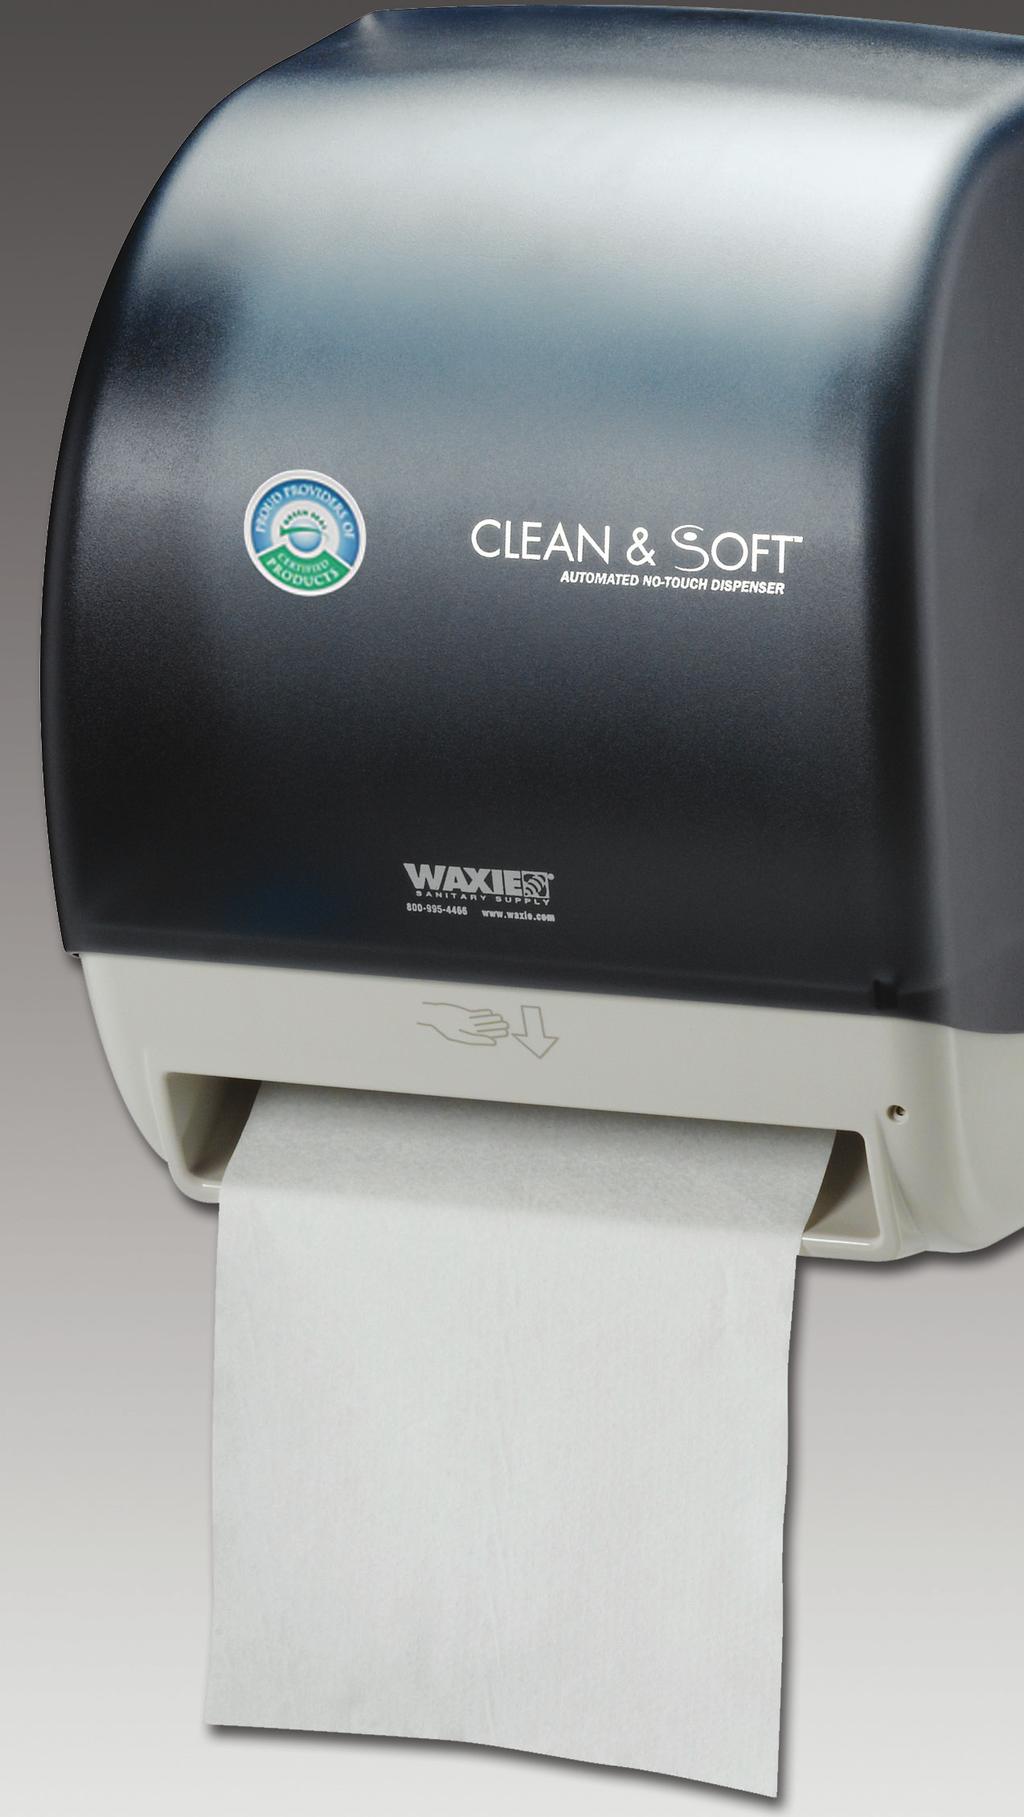 Clean & Soft No-Touch Towel System CLEAN & SOFT NO-TOUCH TOWEL SYSTEM CLEAN & SOFT NO-TOUCH TOWEL SYSTEM These high-capacity dispensers hold one 900' roll, plus a stub roll so the dispenser is filled